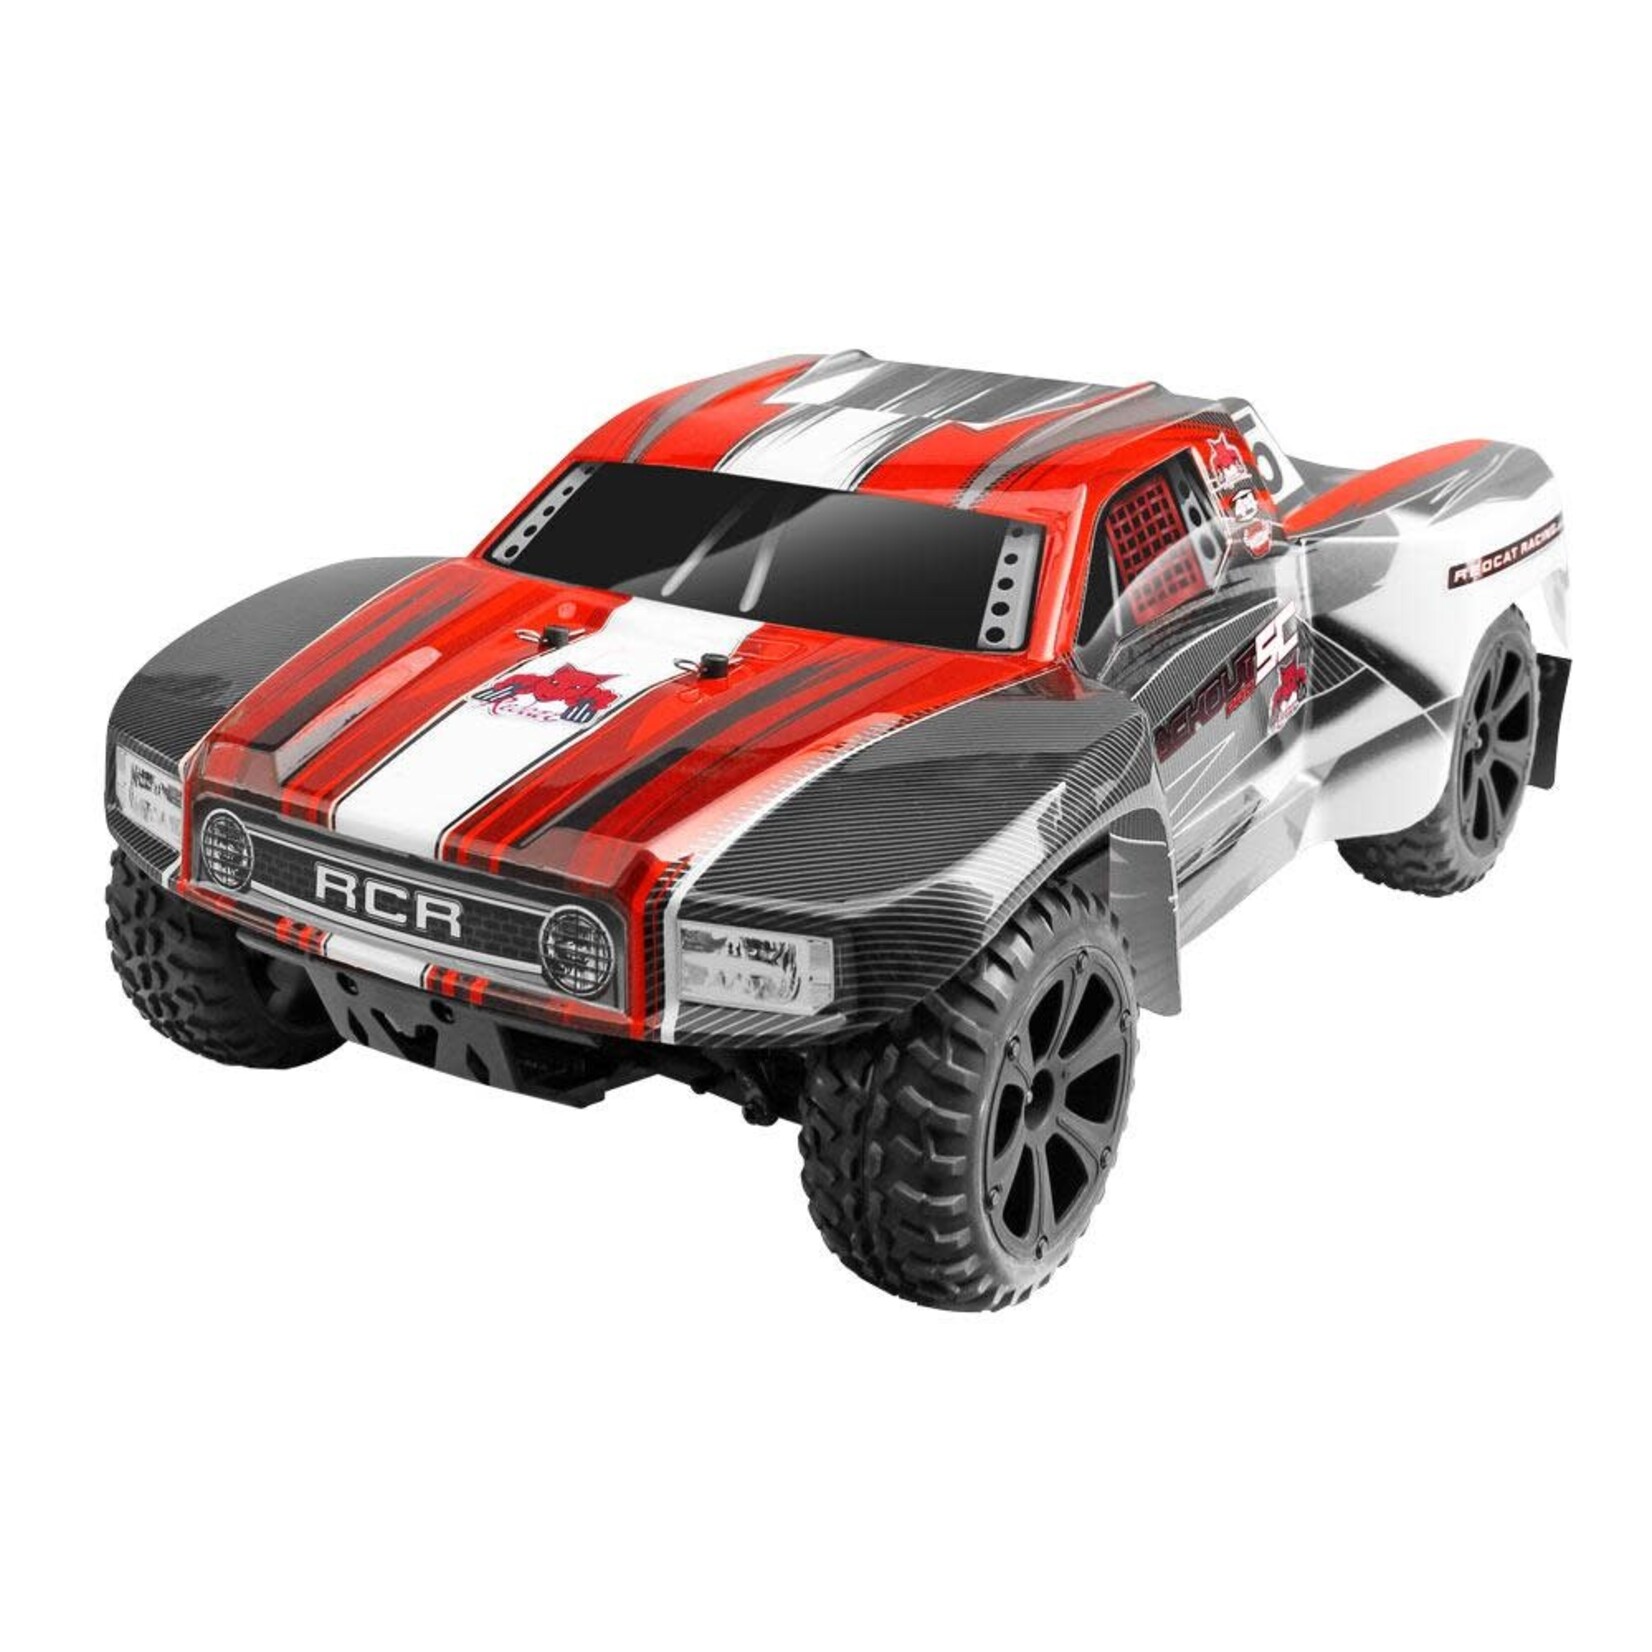 REDCAT Redcat Blackout™ SC PRO Red Short Course Truck 1/10 Scale Brushless Electric